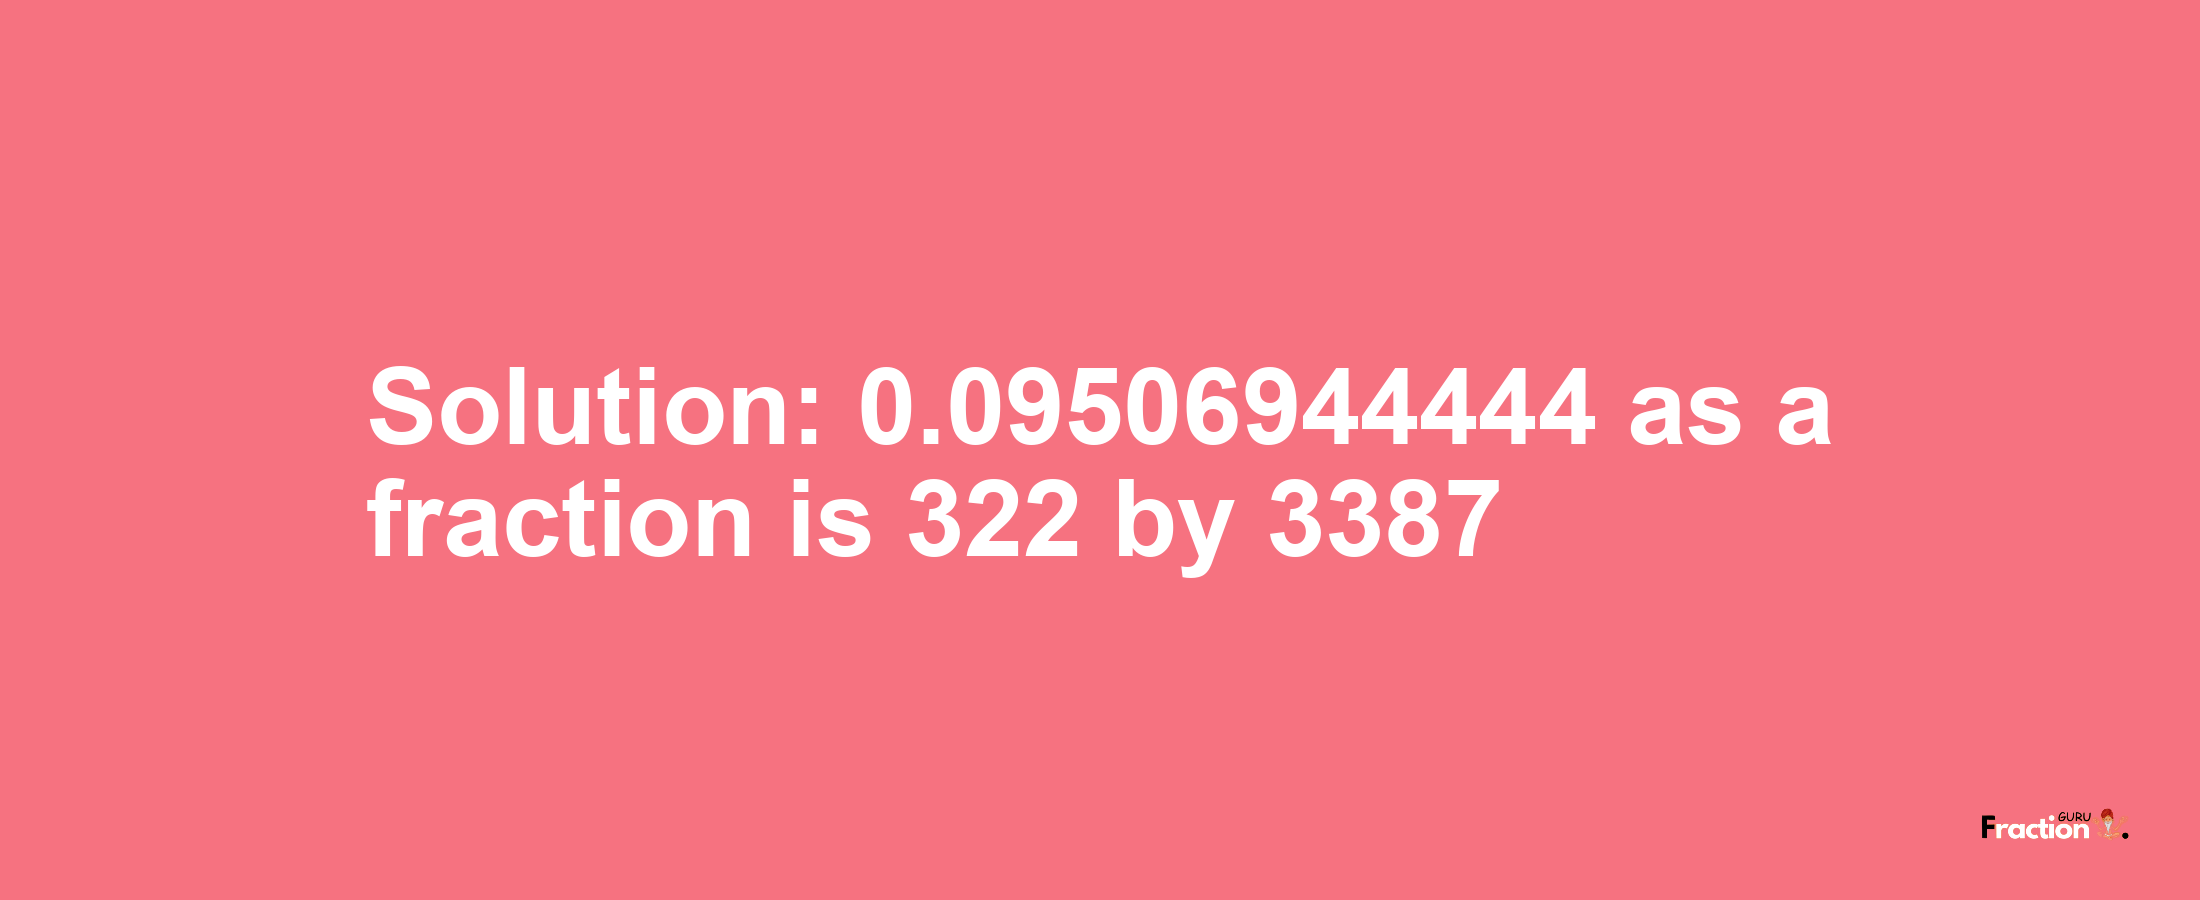 Solution:0.09506944444 as a fraction is 322/3387